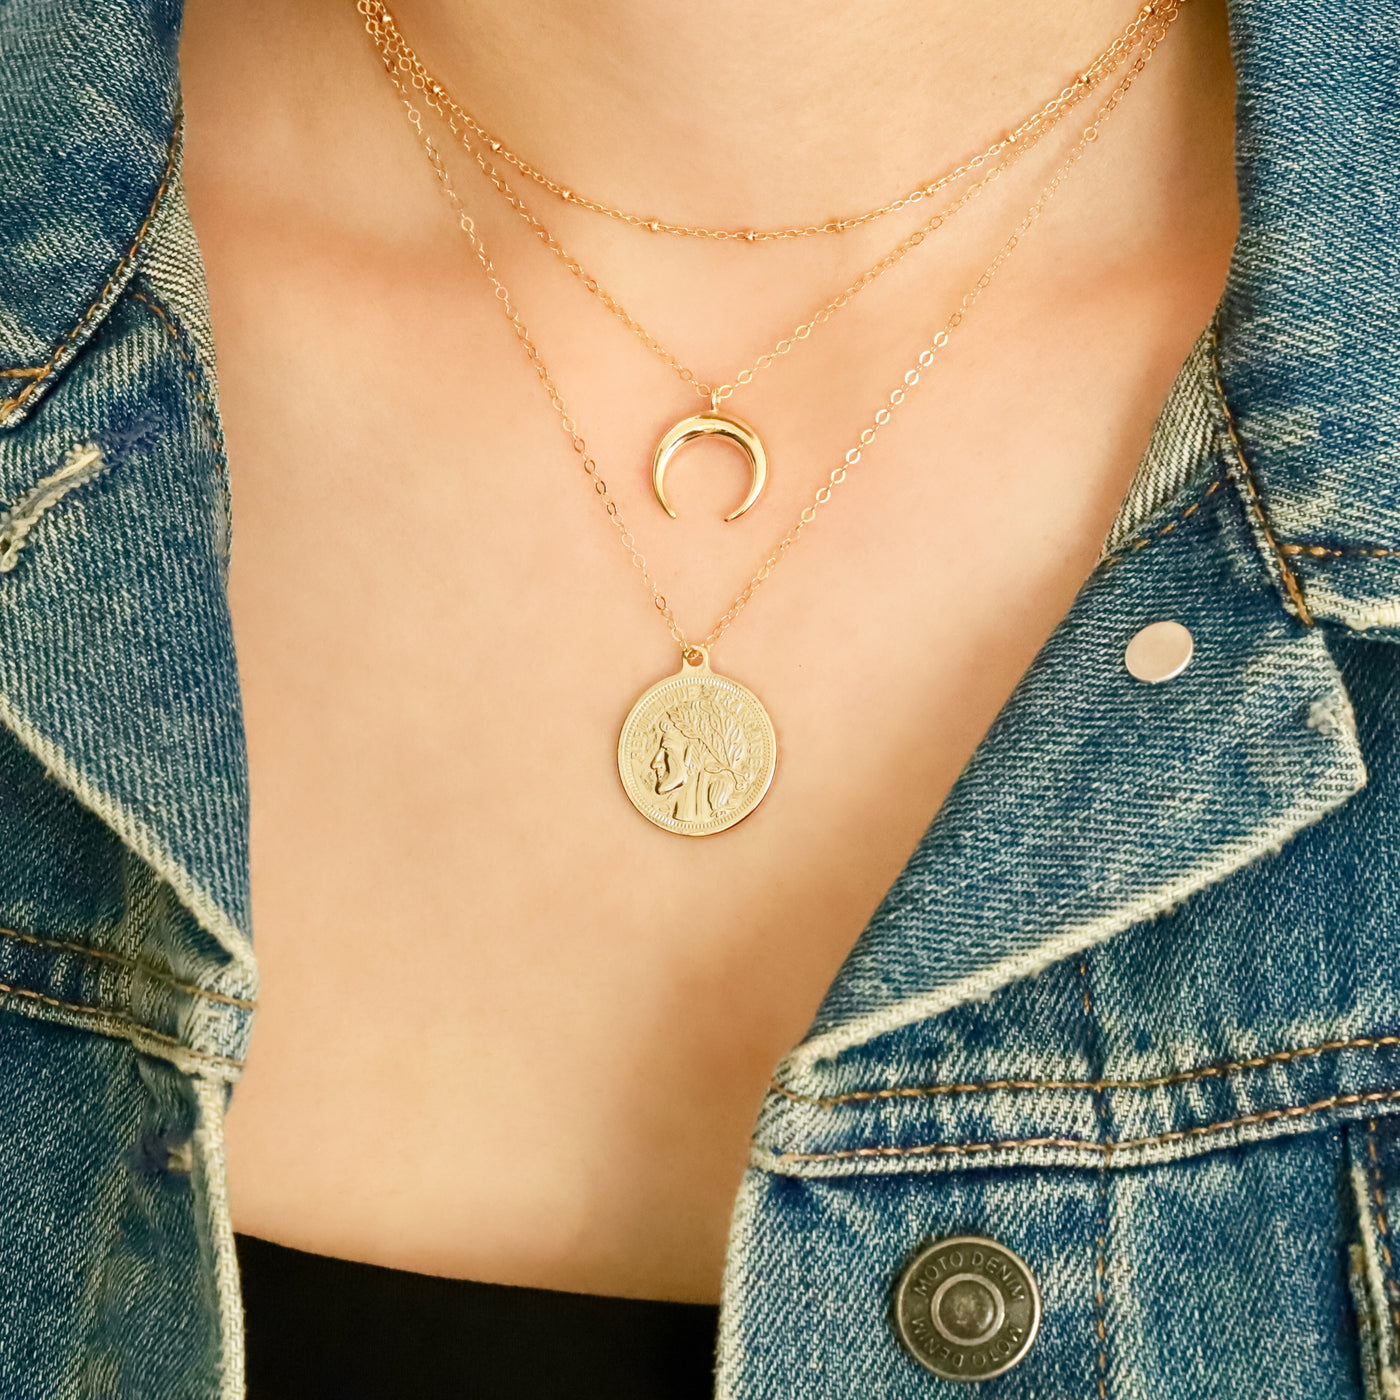 Gold necklaces for everyday wear